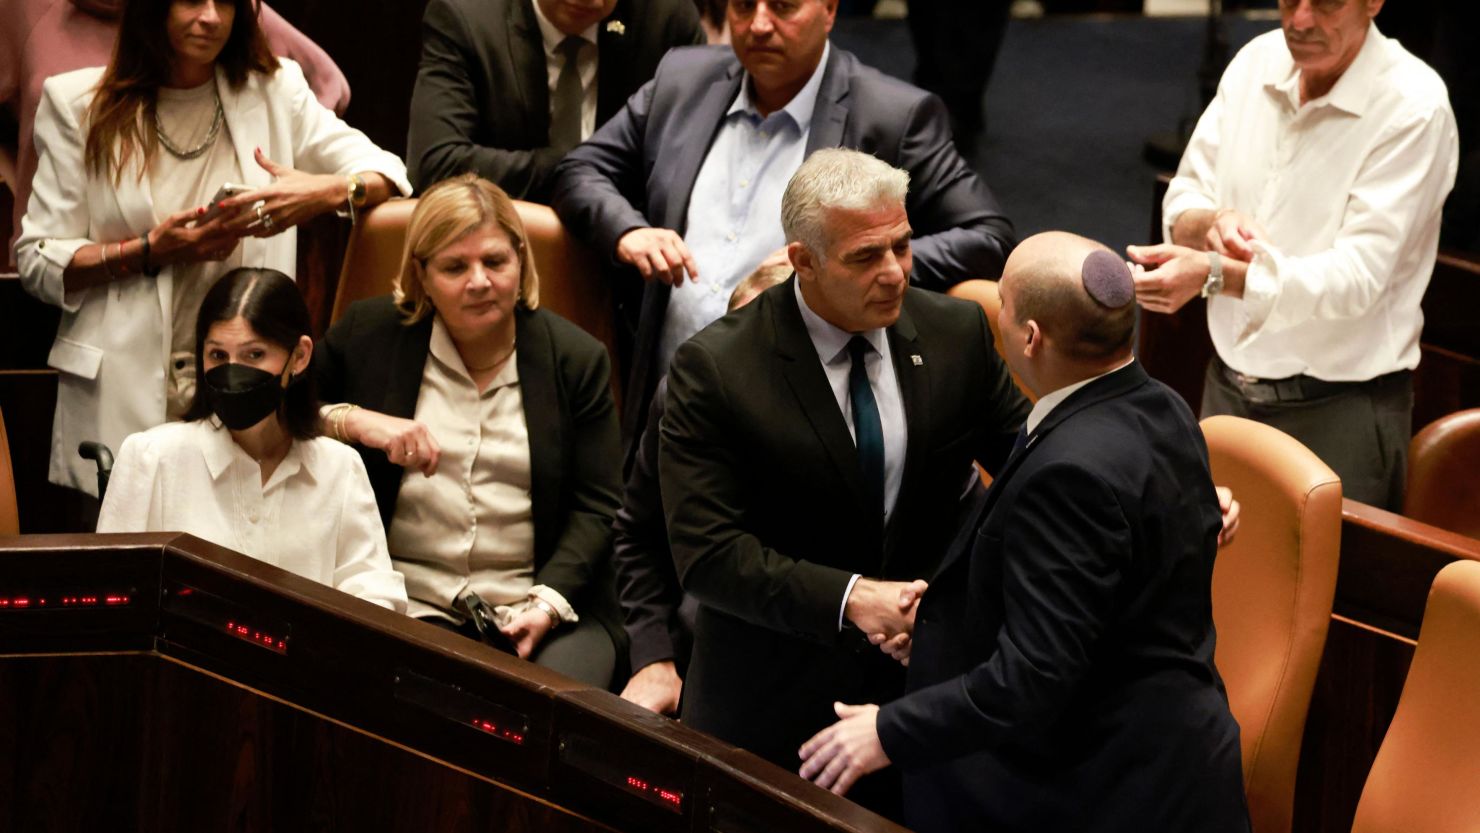 Lapid (center) and Bennett (right) embraced in the Knesset after Thursday's vote.